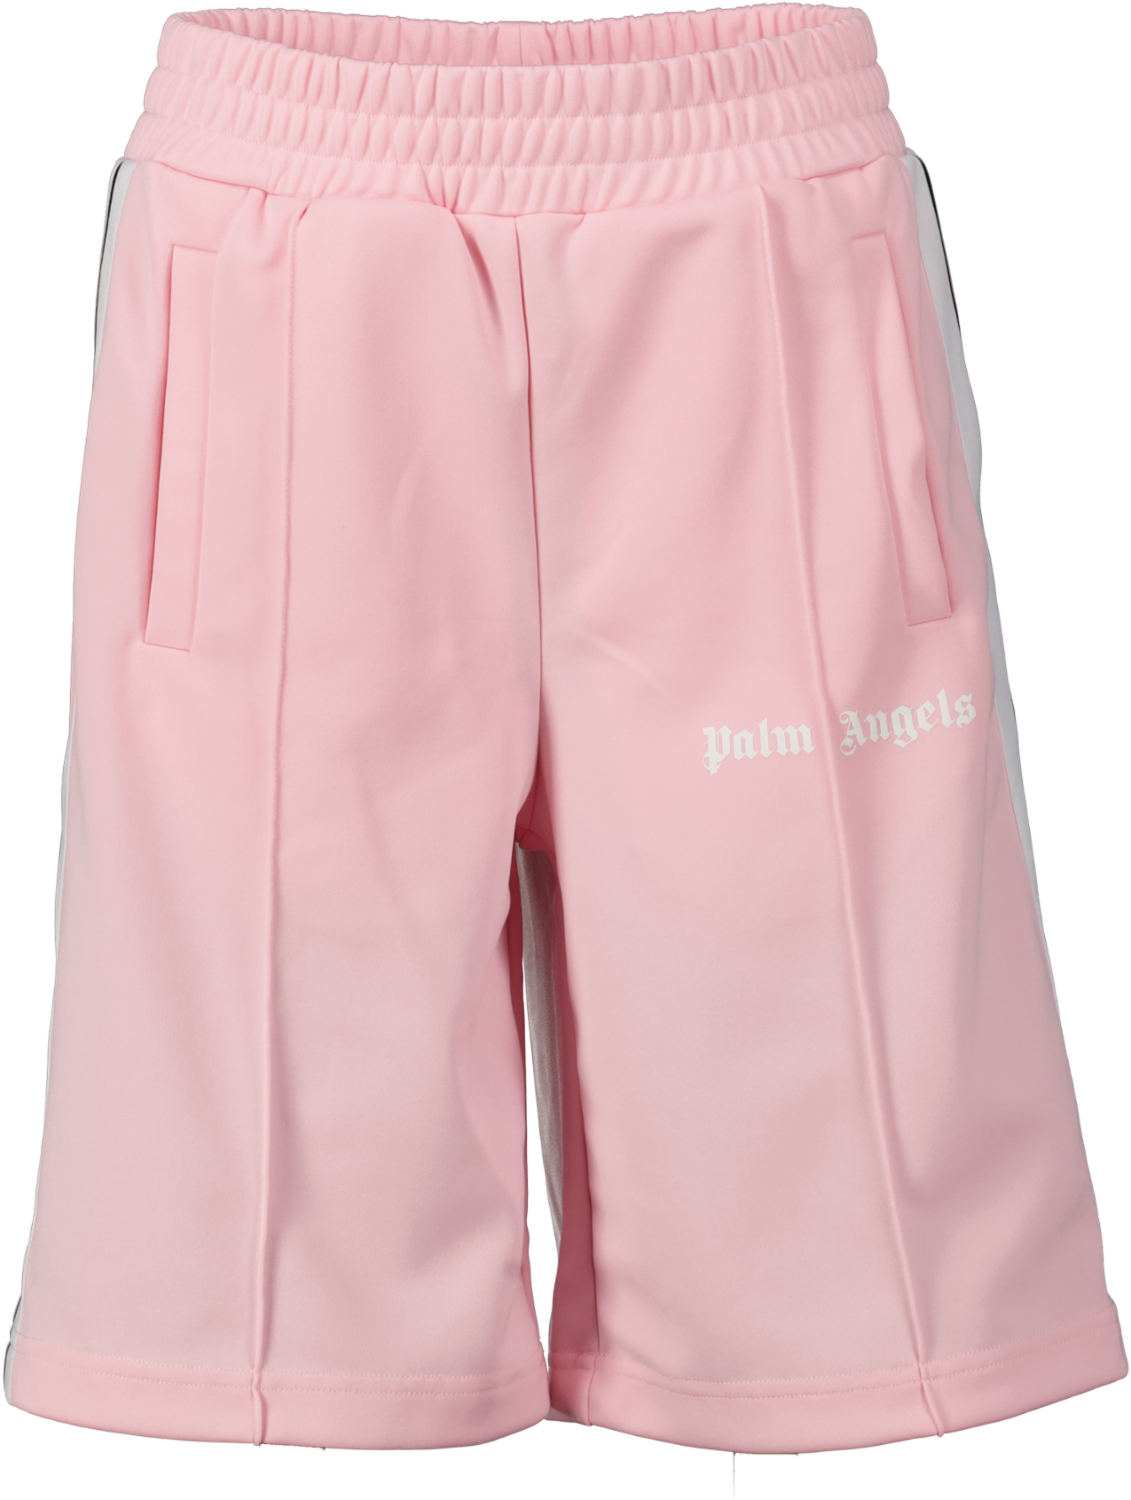 Palm Angels Blossom Pink / White New Classic Track Shorts UK S